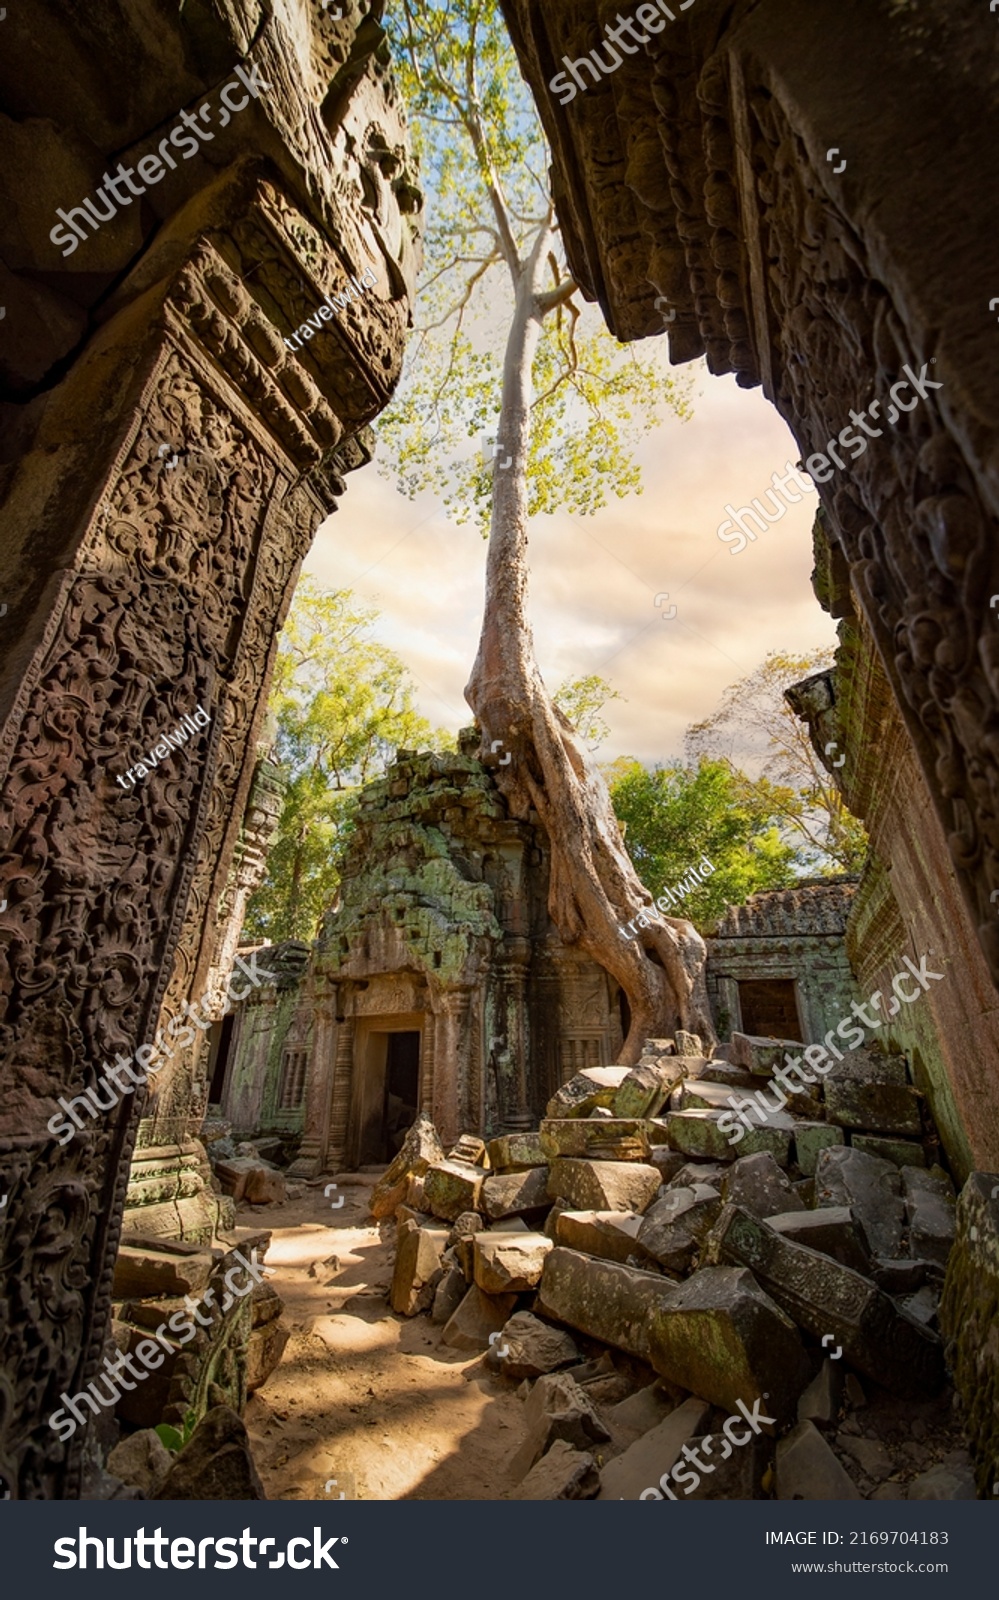 (Selective focus) Stunning view of the Ta Prohm temple with trees growing out of the ruins. Ta Prohm is one of the most visited complexes in Cambodia’s Angkor region. #2169704183